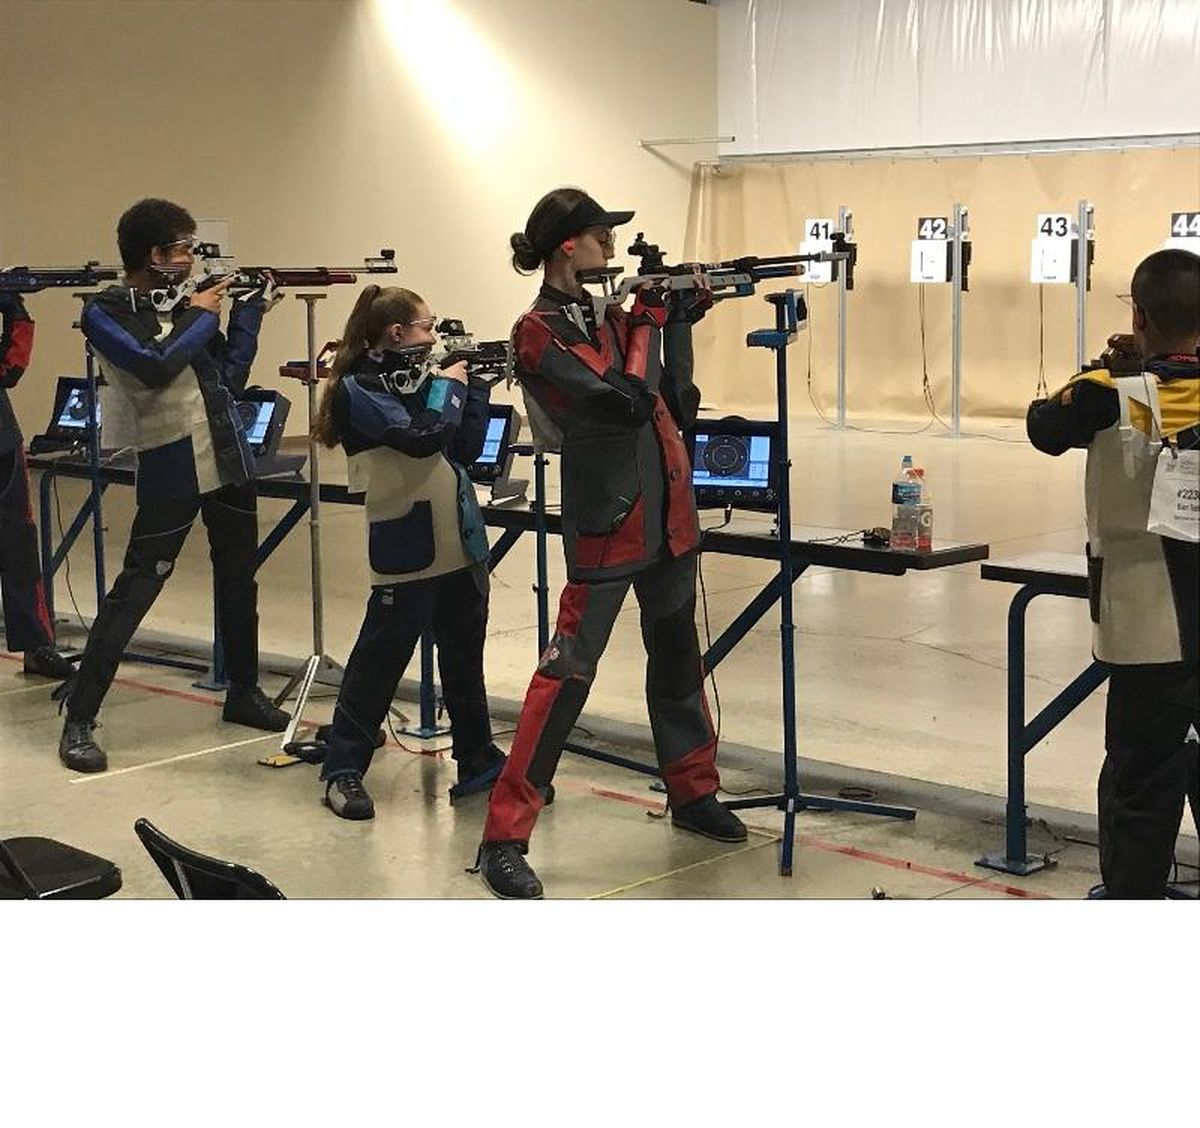 Spokane Junior Rifle Club Gold Team members – from left, David Wright, Cassidy Wilson, Taylor Christian and Ben Tafoya – compete last June at the Civilian Marksmanship Program National Air Rifle Championships and 3 Position Junior Olympic Air Rifle Championships at Camp Perry, Ohio. Competitors had to have prequalified at local matches. (Courtesy of Tammy Christian)